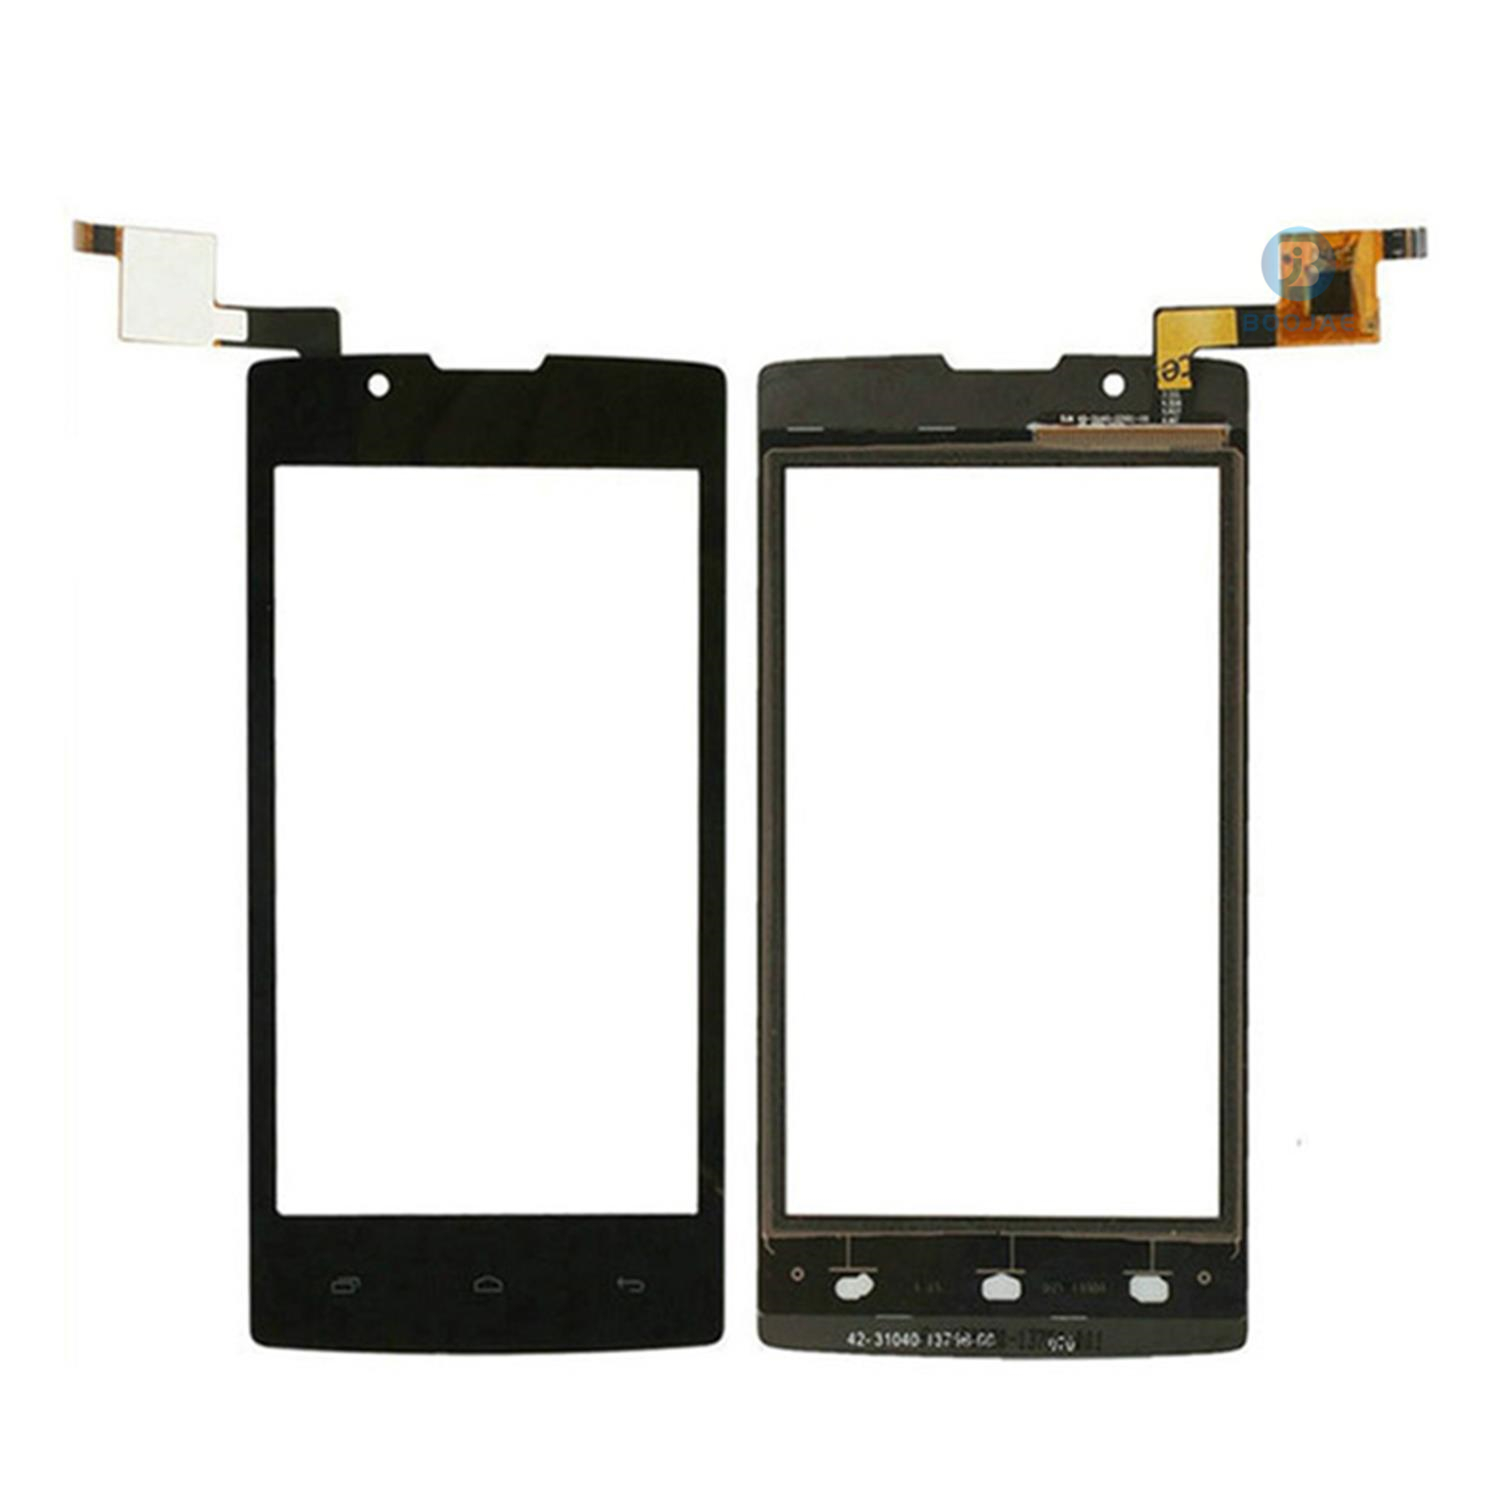 For FLY FS401 Touch Screen Panel Digitizer Replacement High Quality